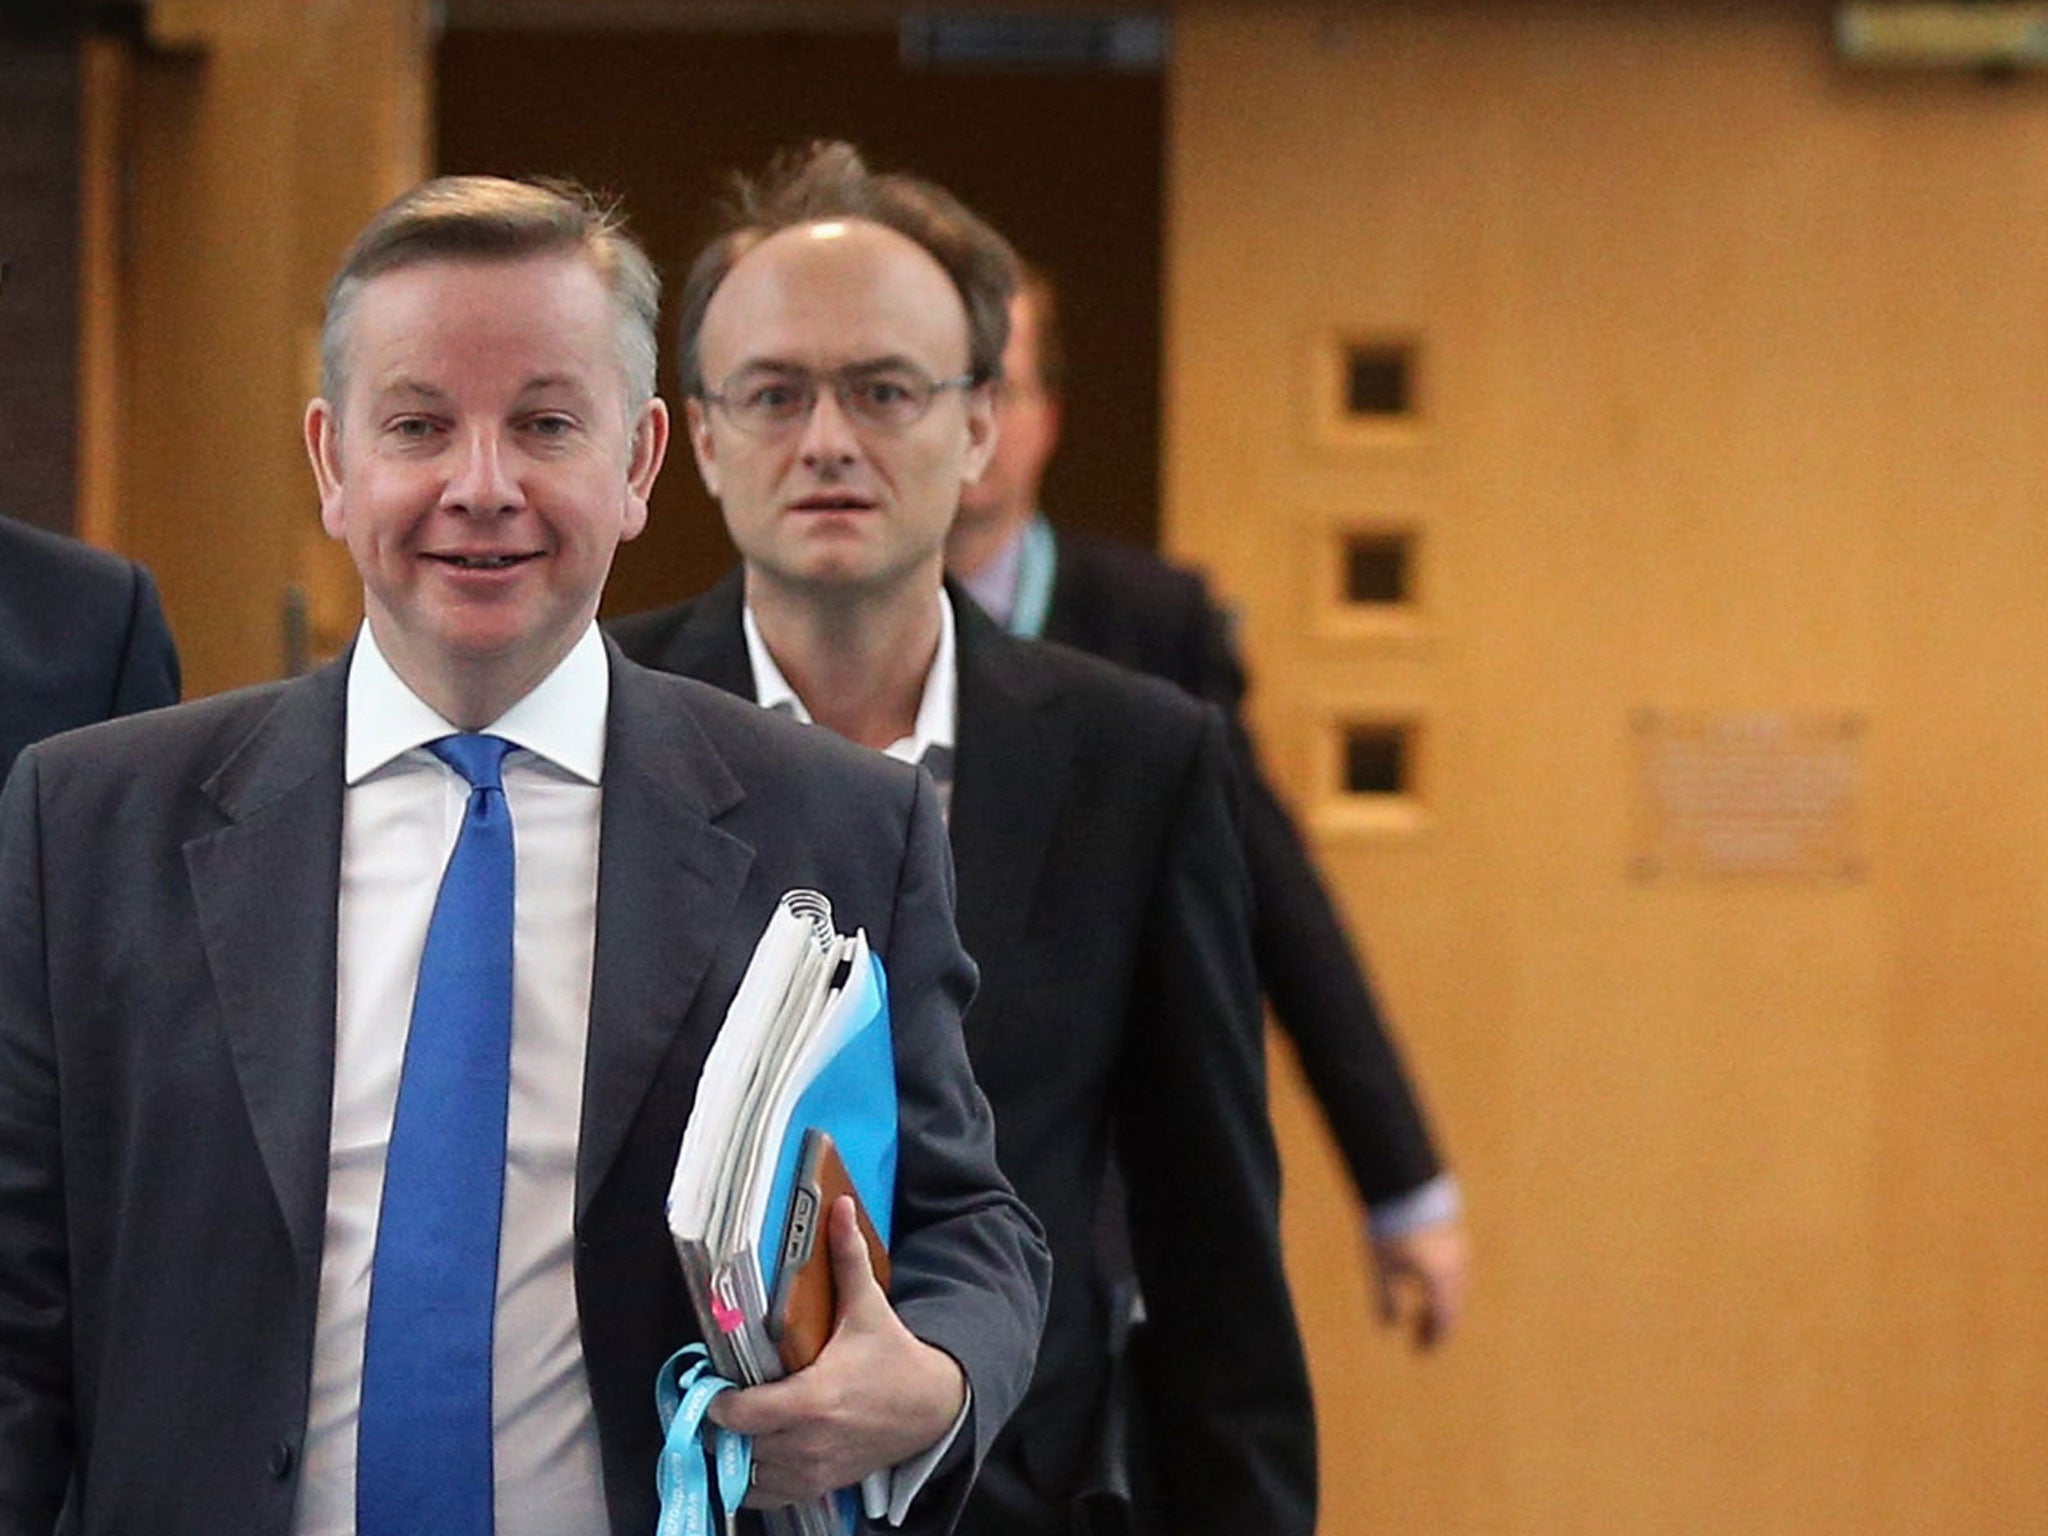 Dominic Cummings, pictured here with Michael Gove has hit out at Sir Michael Wilshaw